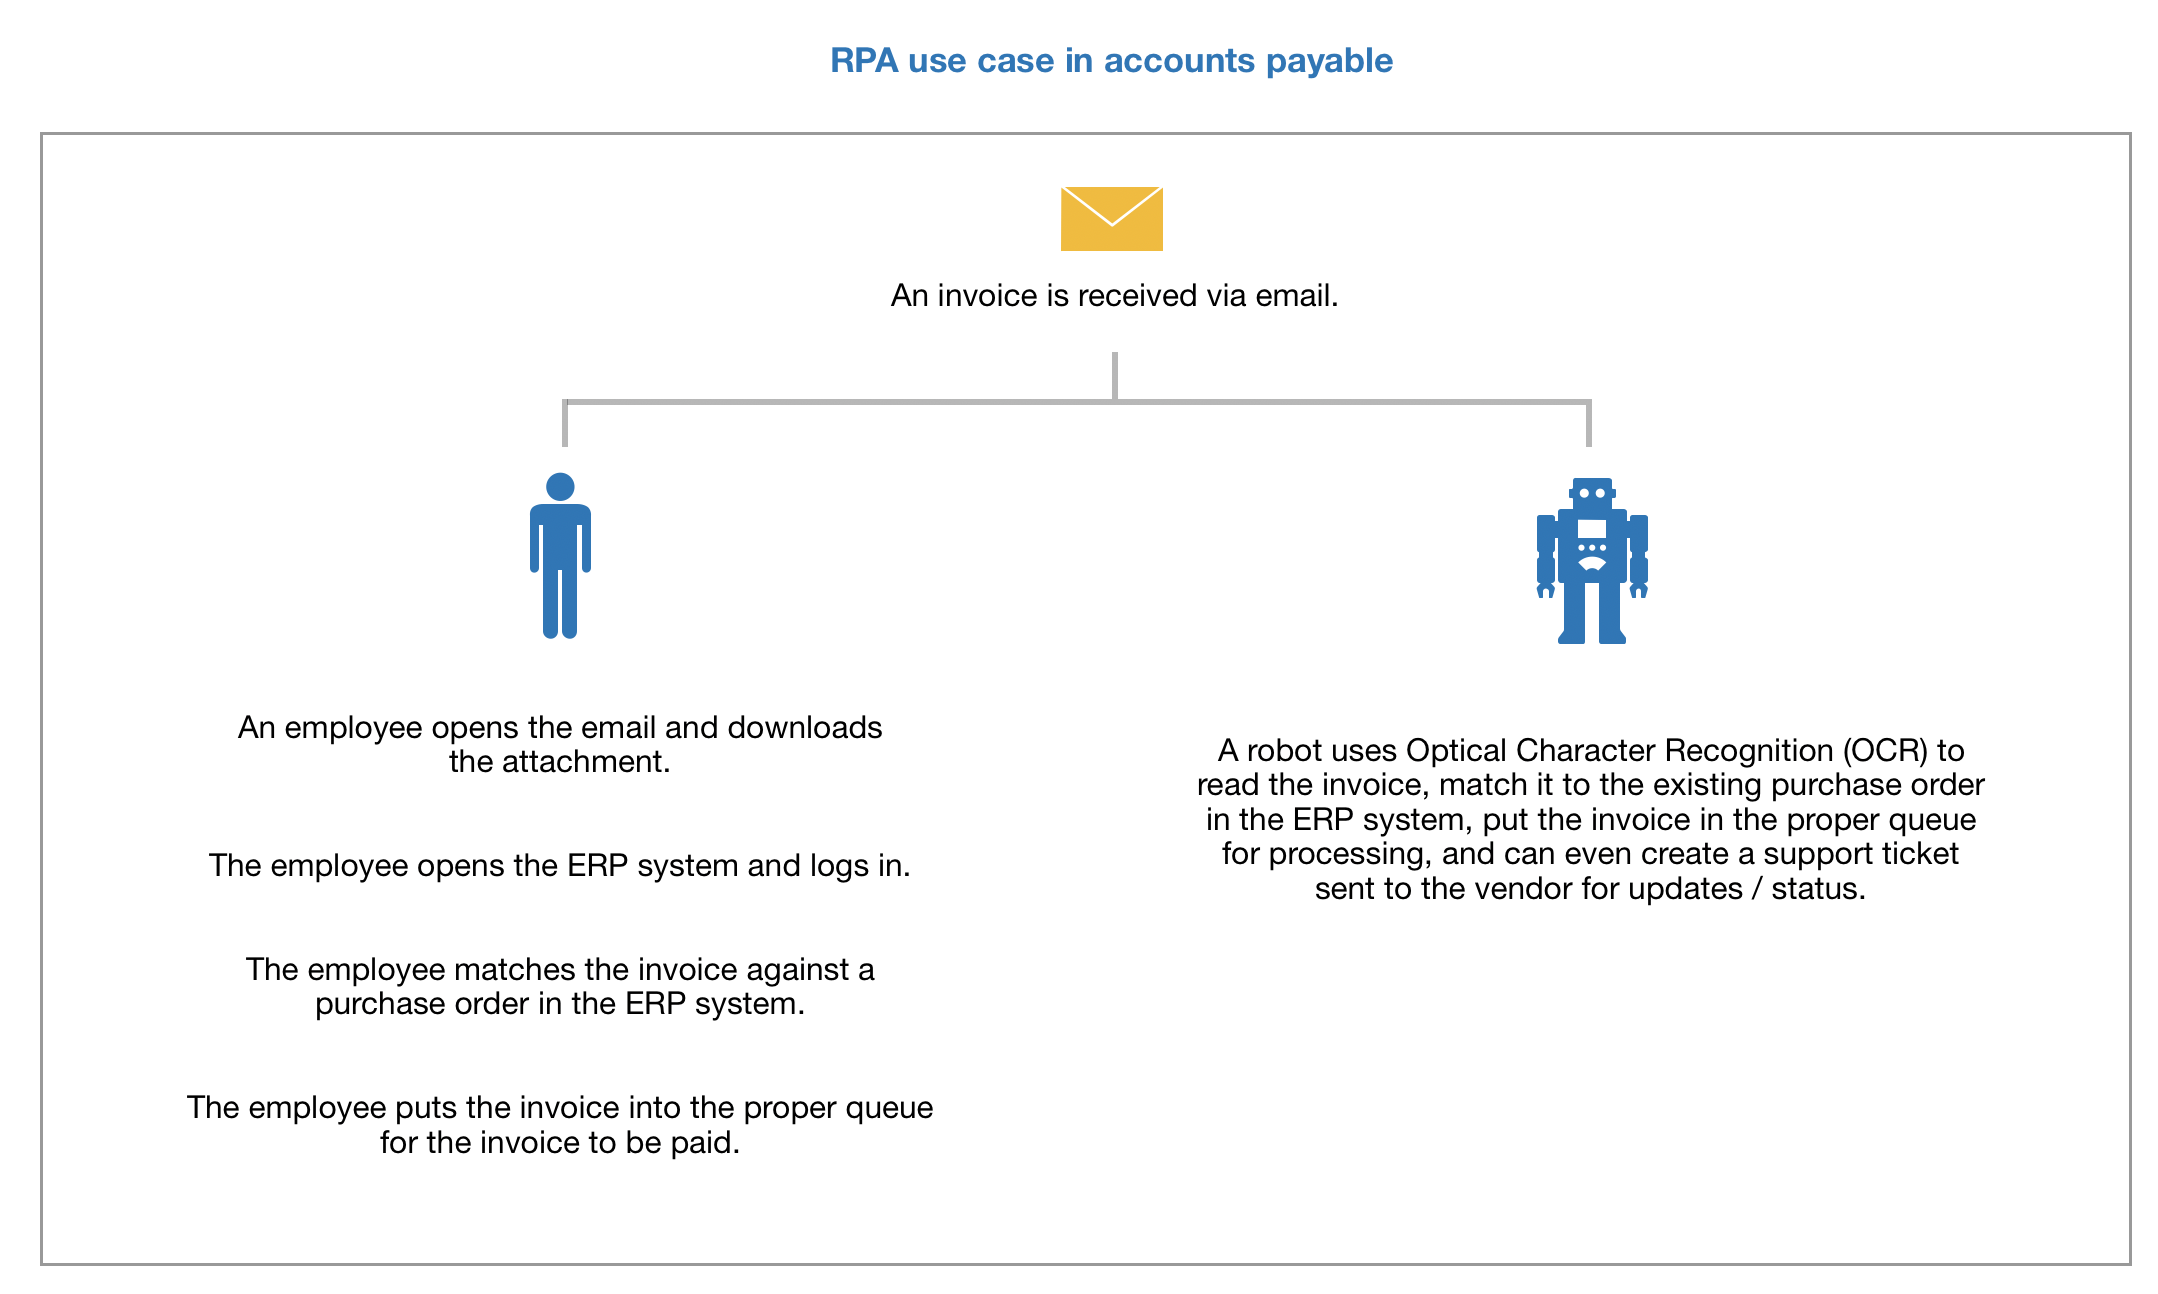 RPA use case in accounts payable